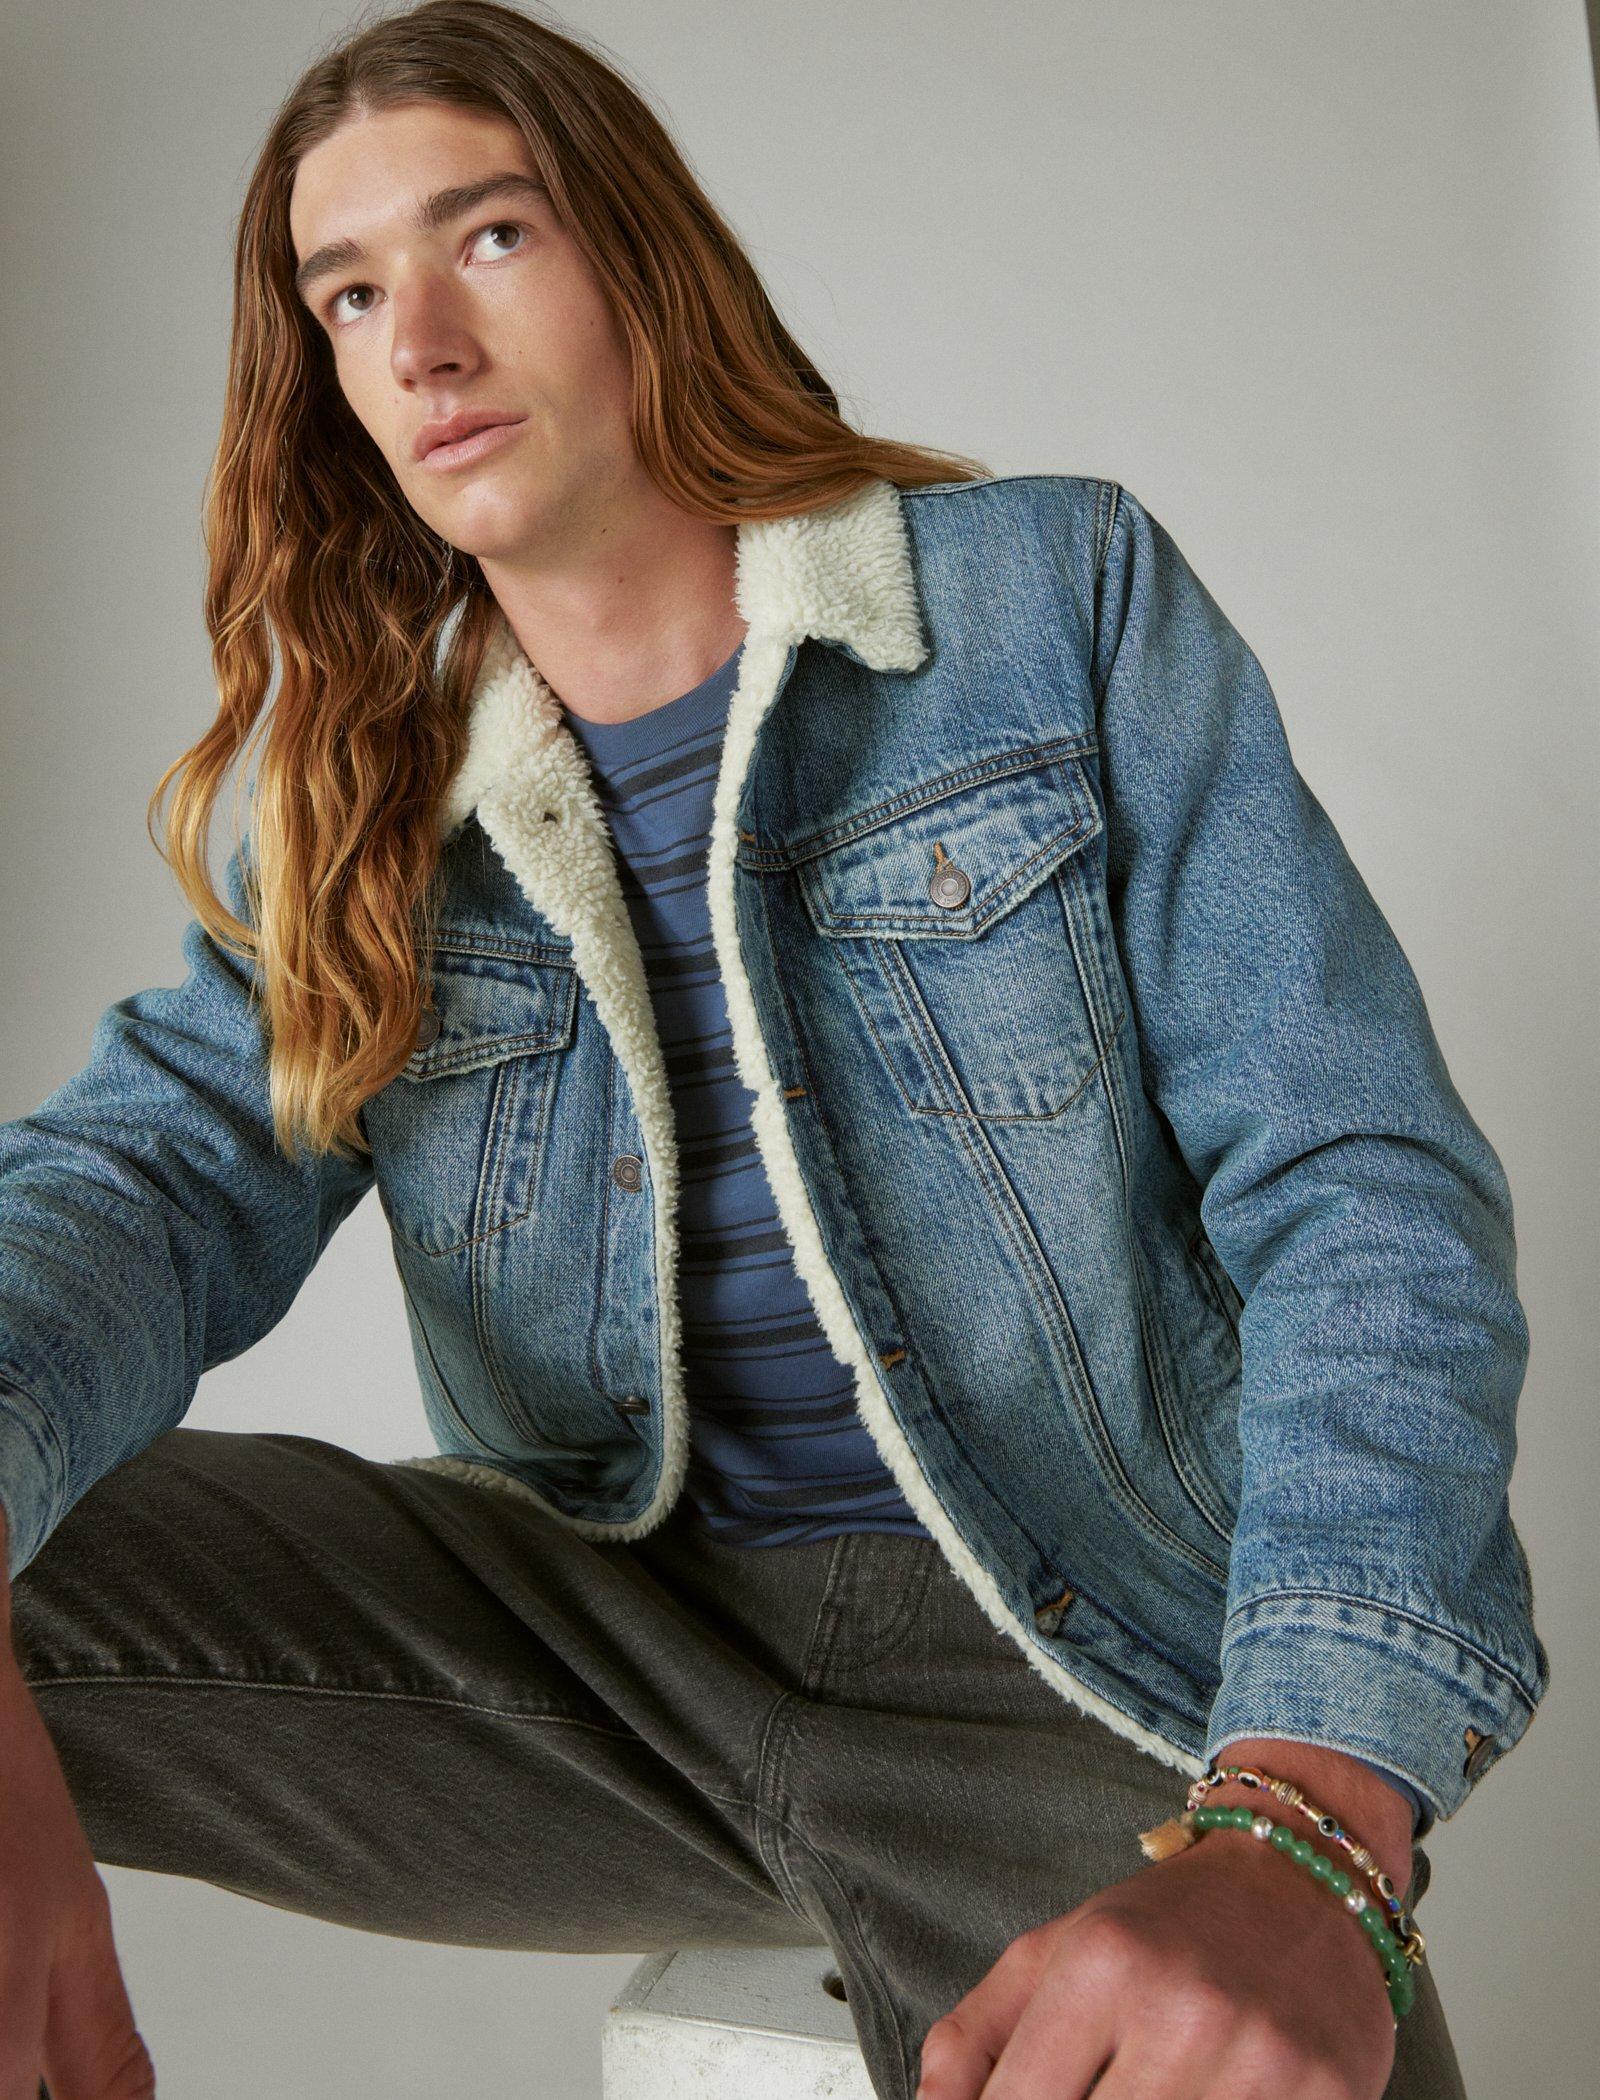 Lucky Brand Faux Shearling Lined Denim Trucker Jacket in Blue for